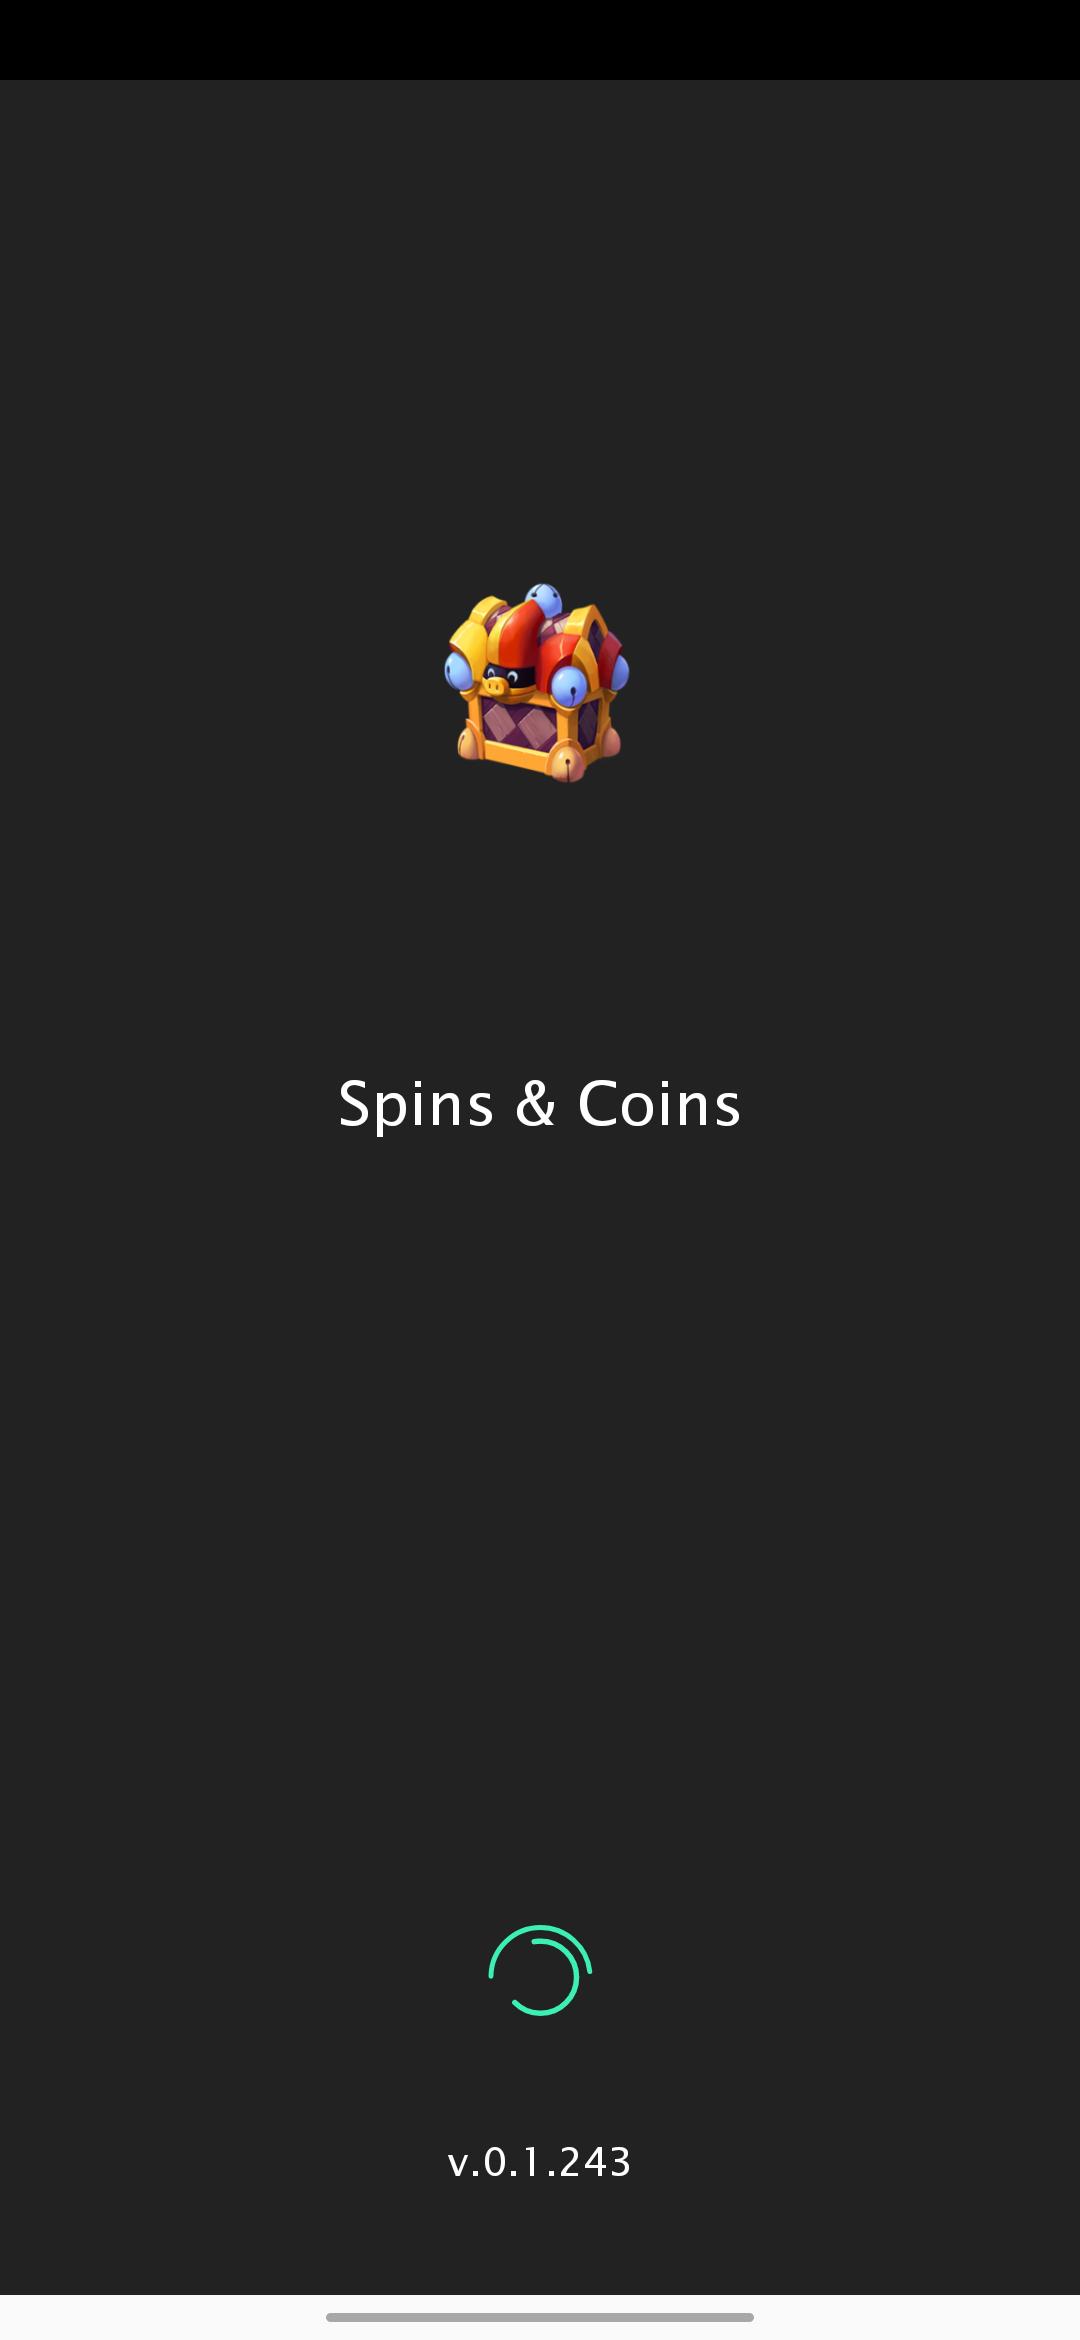 Spin coin